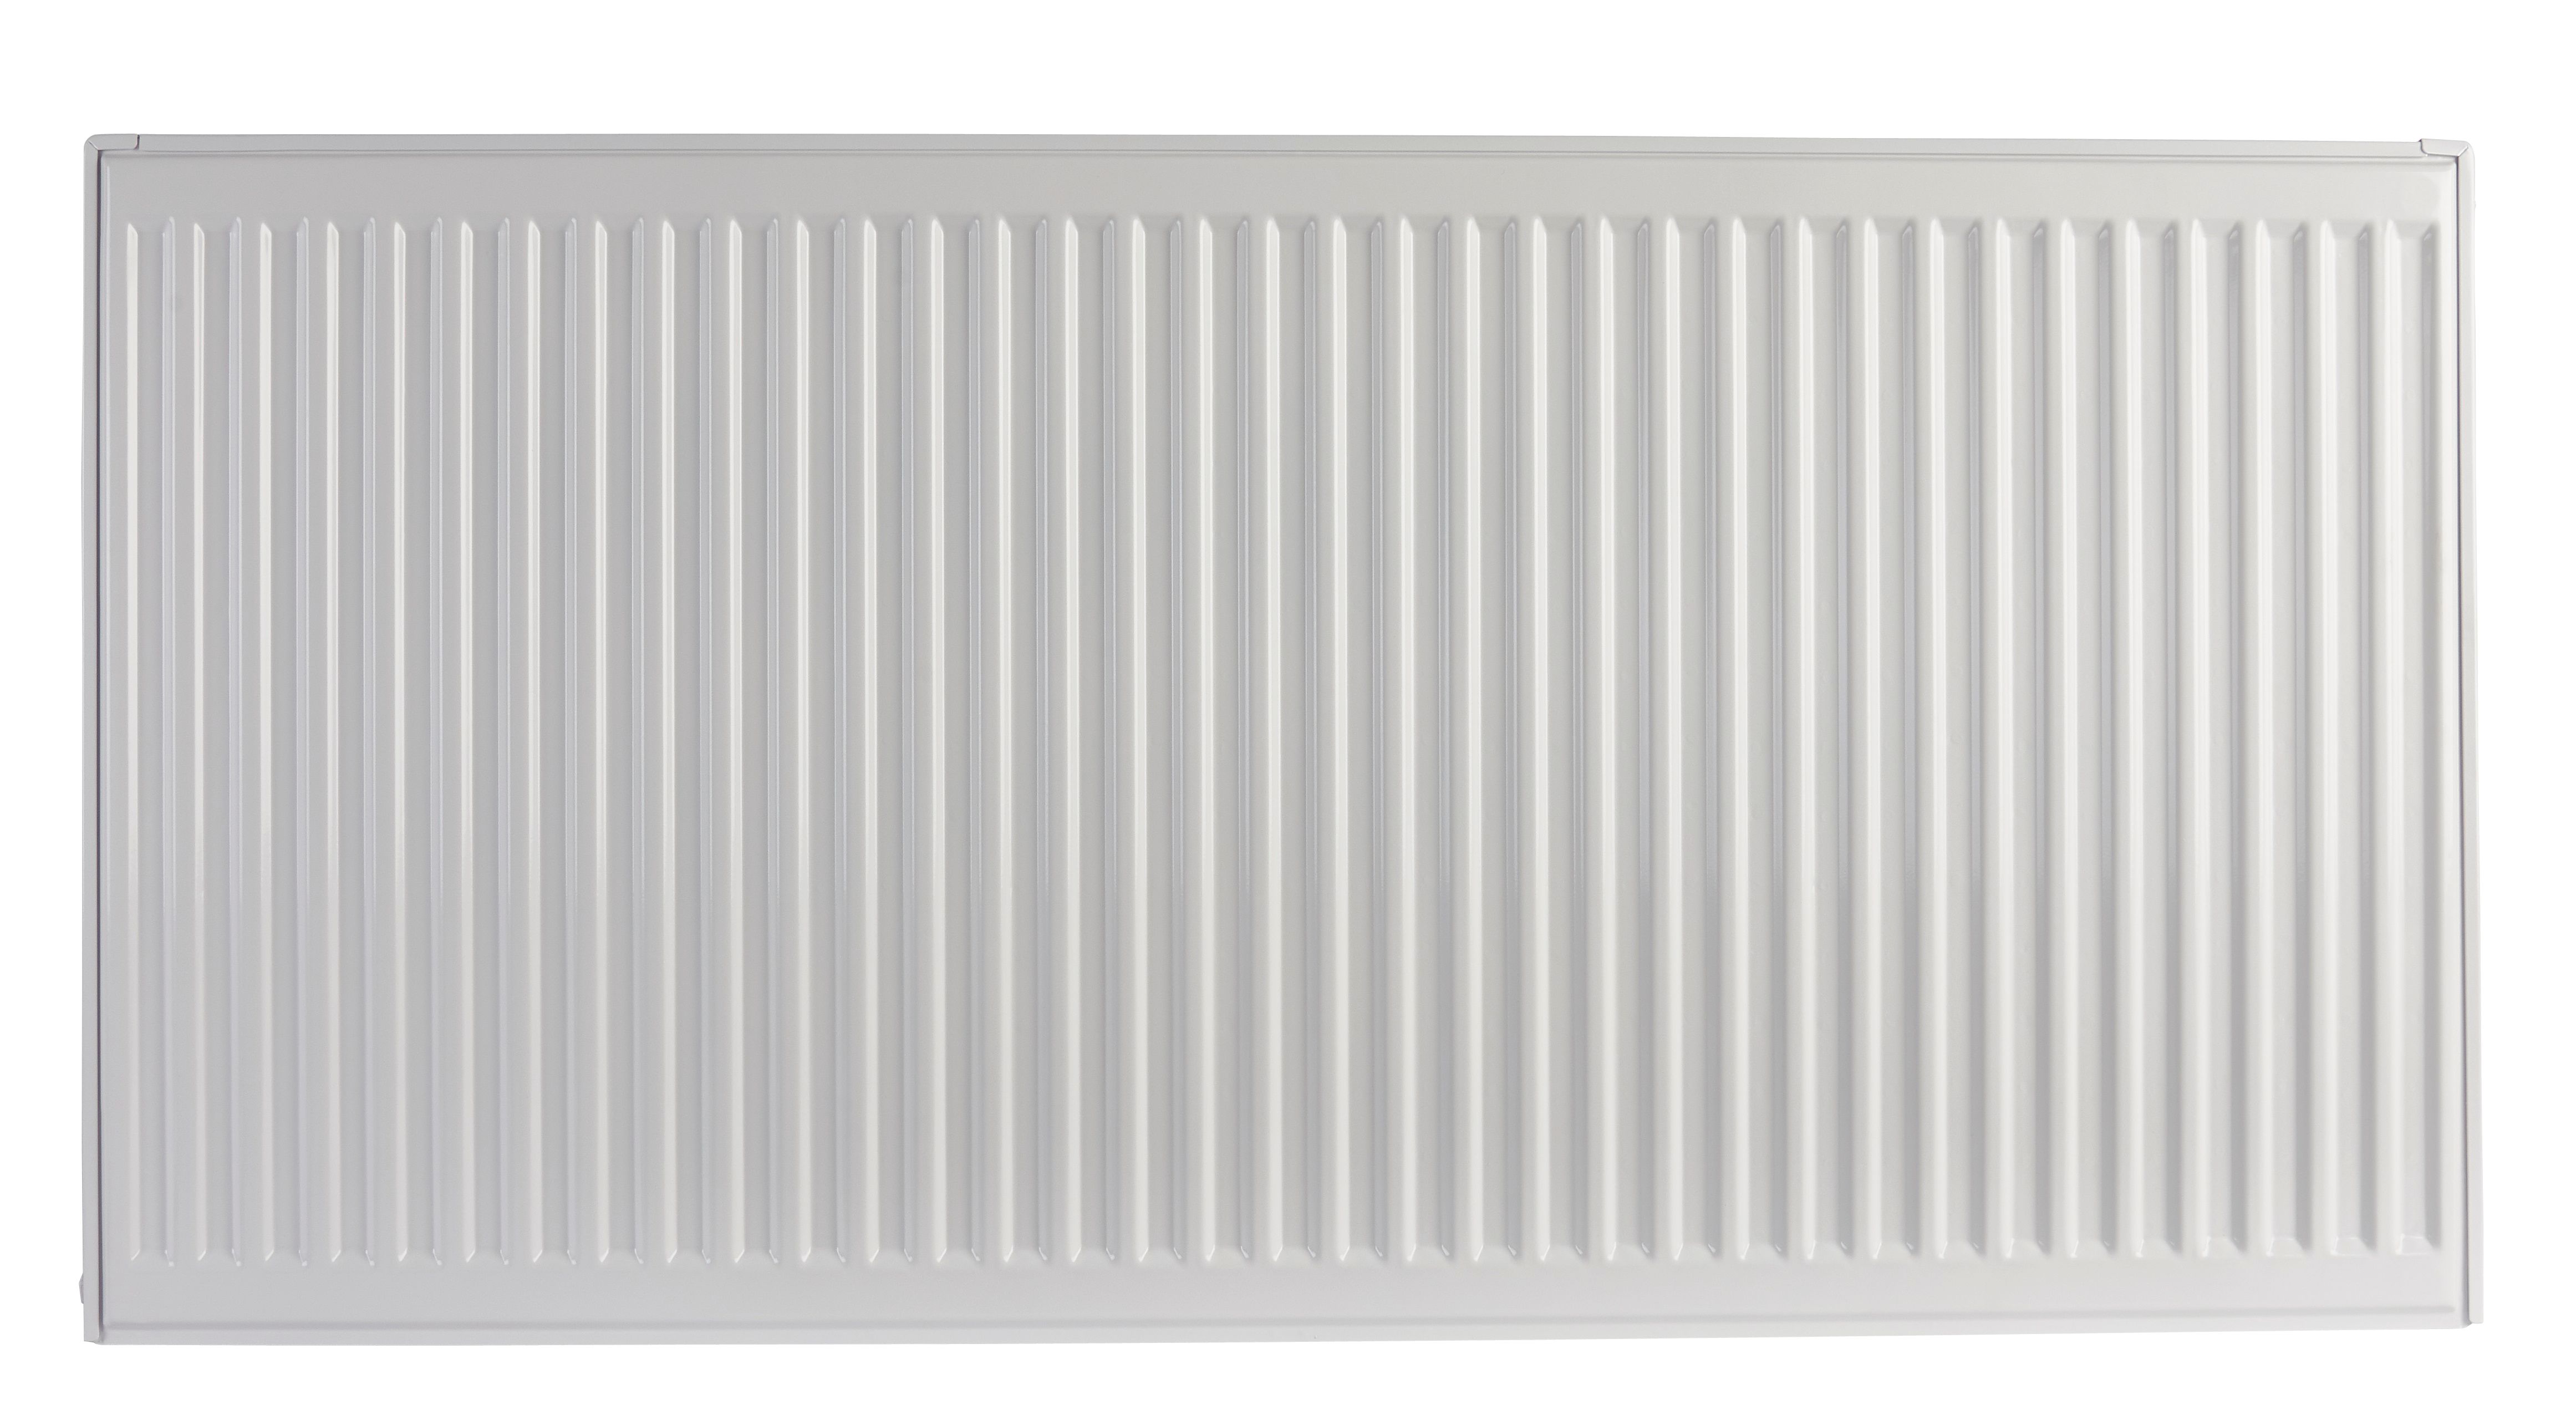 Image of Homeline by Stelrad 500 x 900mm Type 22 Double Panel Premium Double Convector Radiator